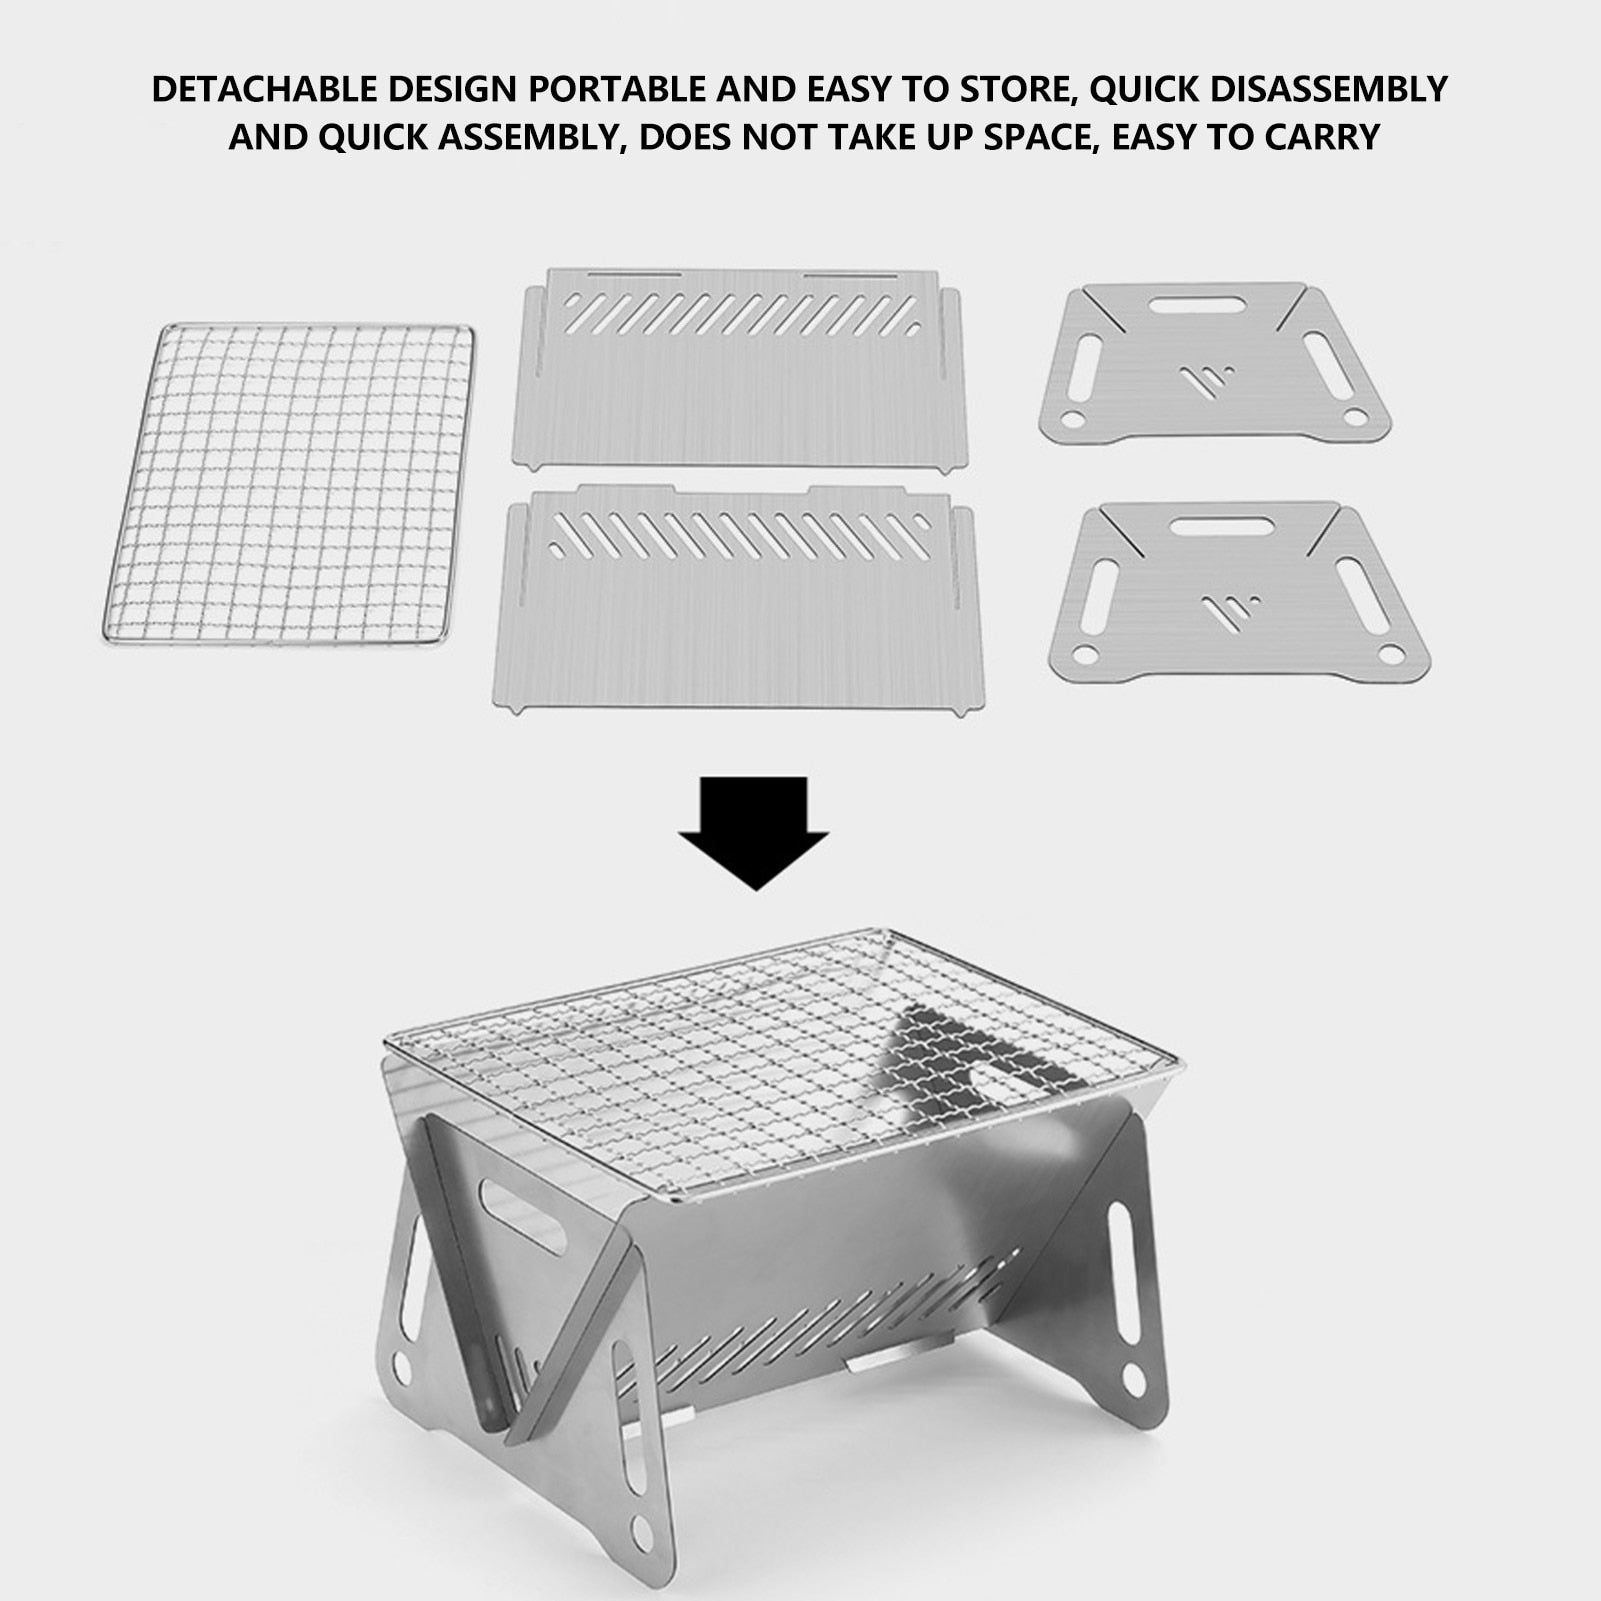 Portable Charcoal Grill Folding Campfire Grill Folding Stainless Steel Grate For Fire Pit Grill Portable Campfire Cooking - DragonHearth